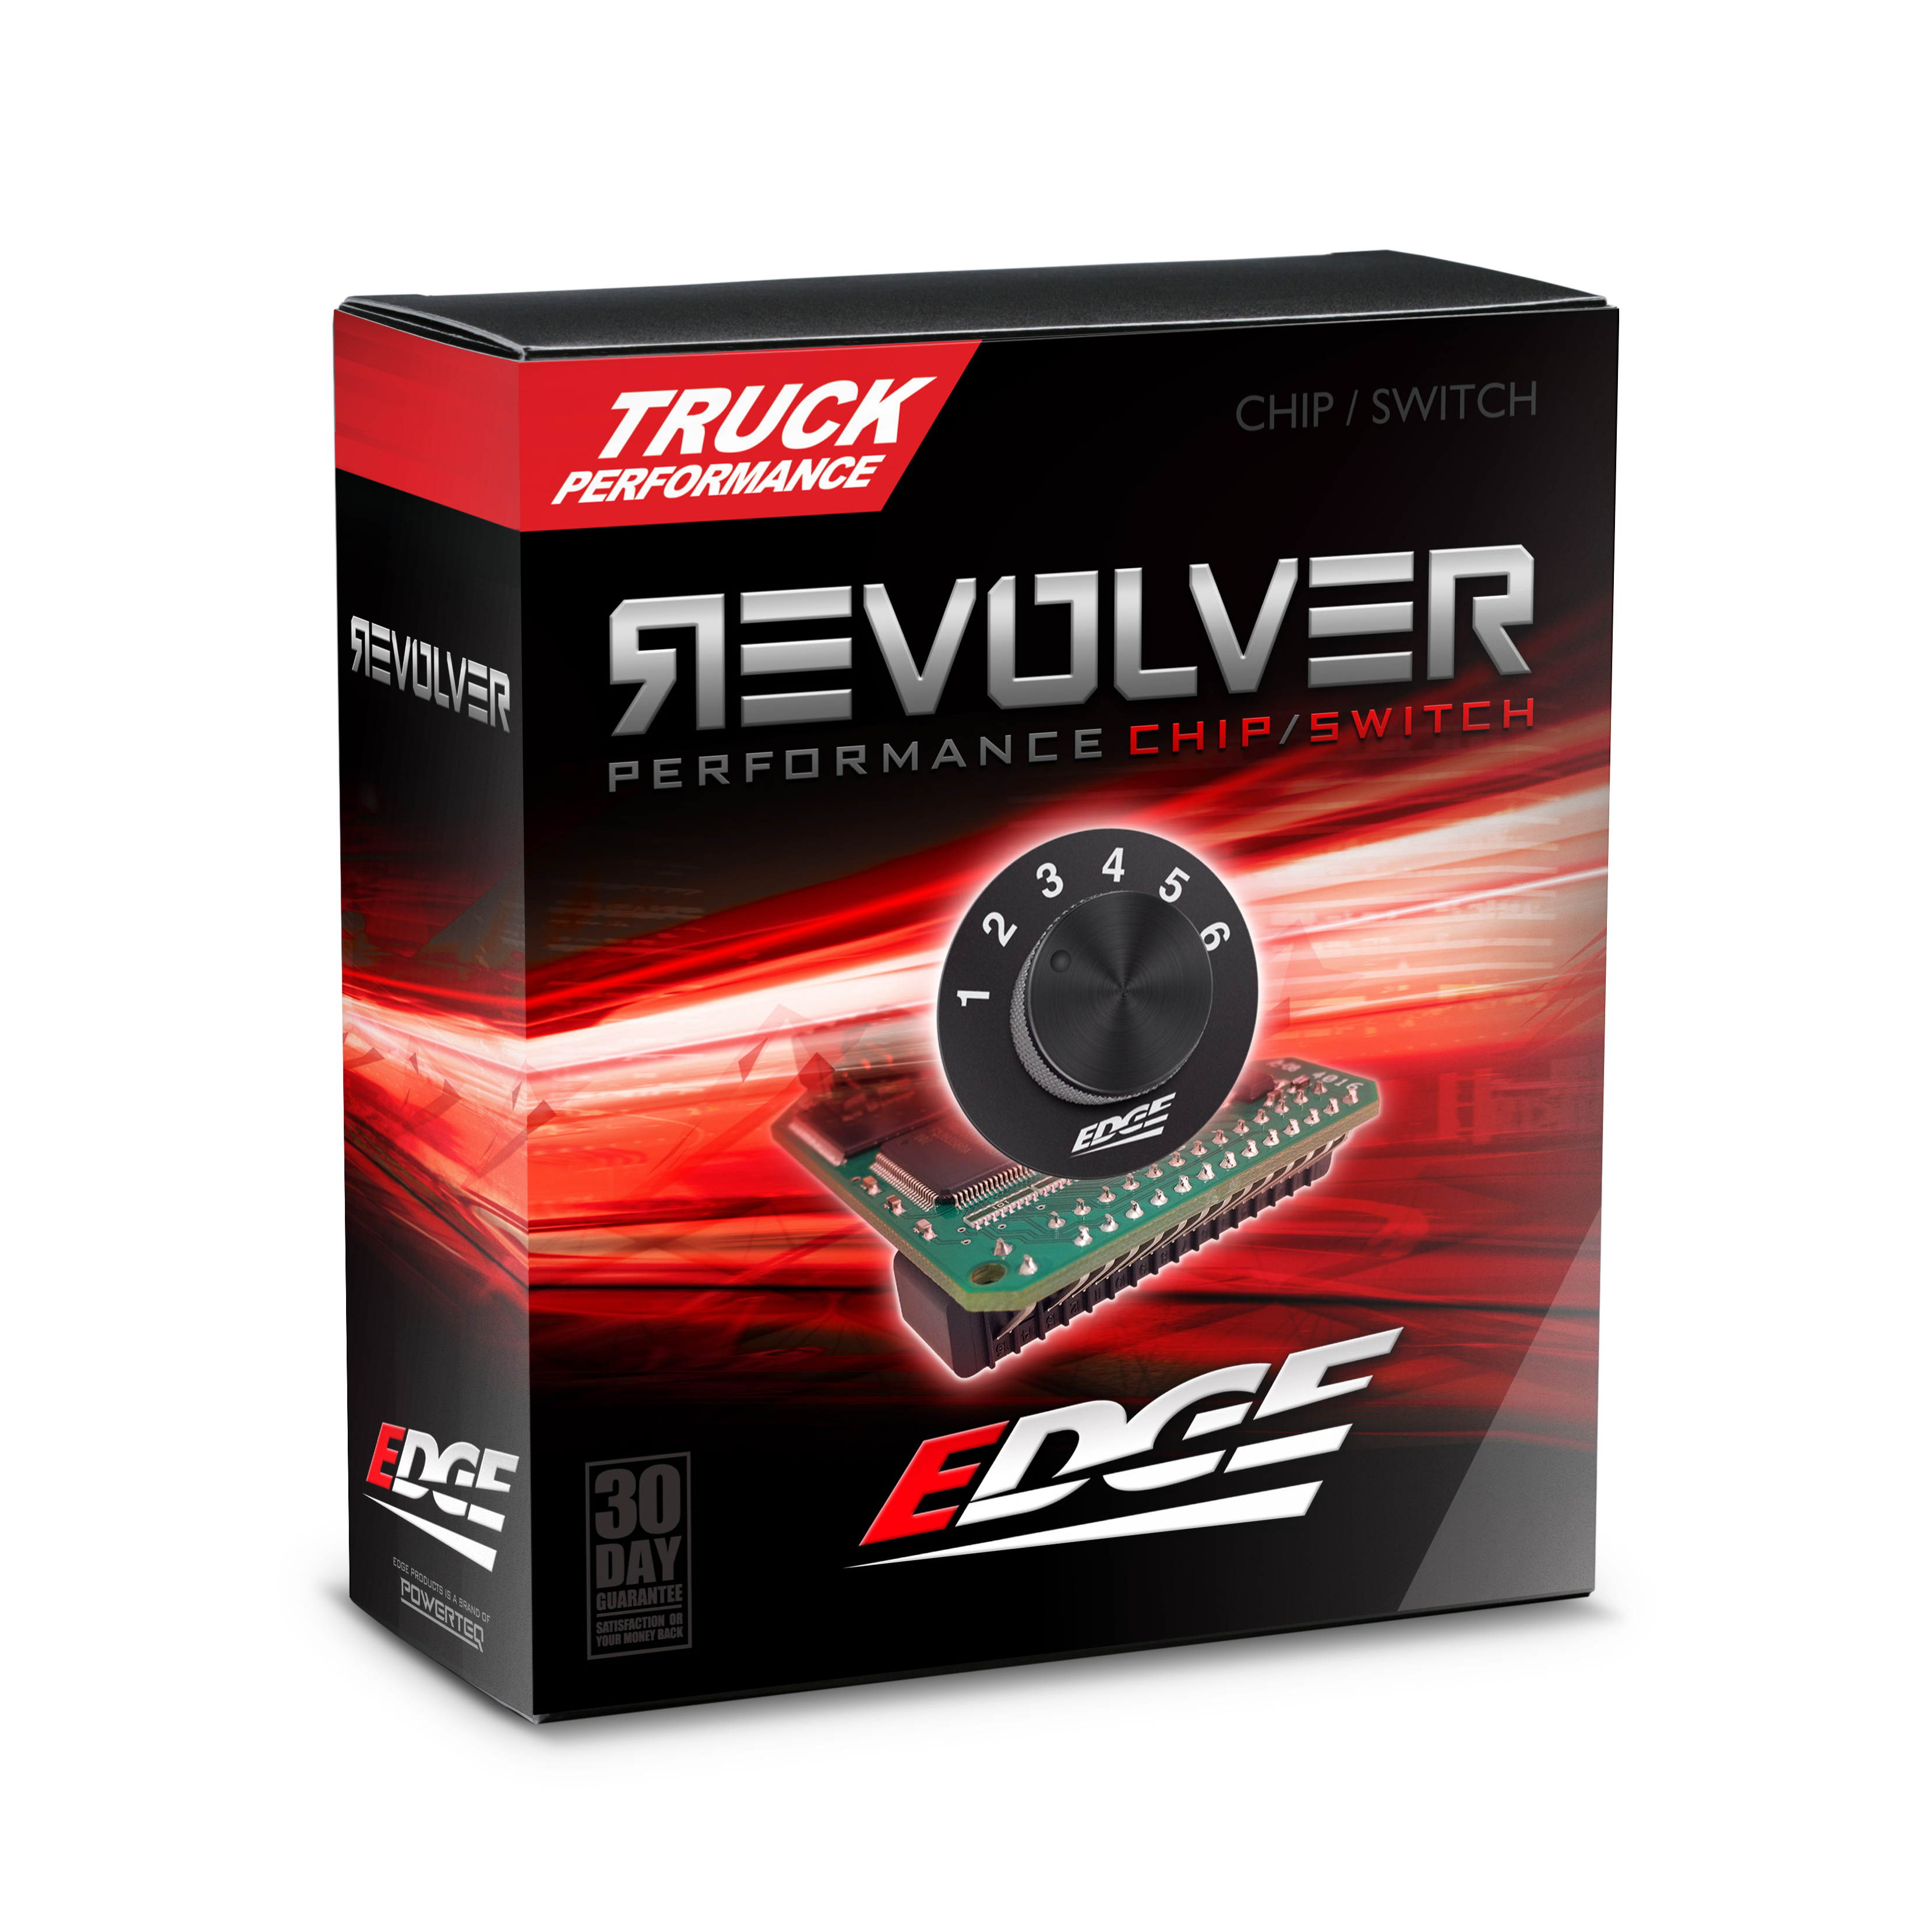 REVOLVER PERFORMANCE CHIP/SWITCH FORD 7.3L 95-97 Manual 6-Chip Master Box Code MLE1